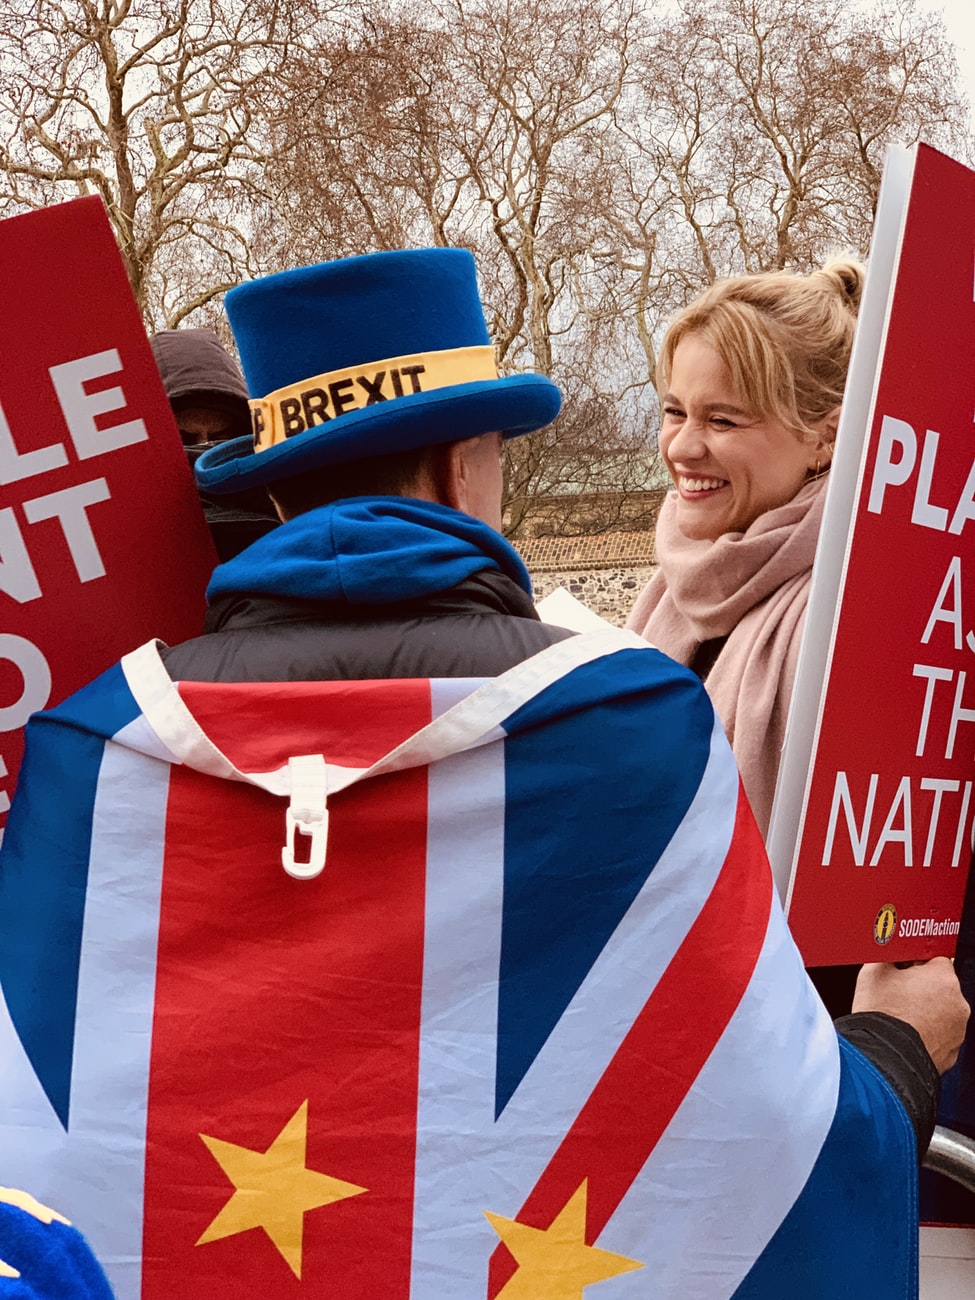 A picture of a man dressed in a top hat with Brexit on it draped in an EU flag. He is holding banners but text cannot be read